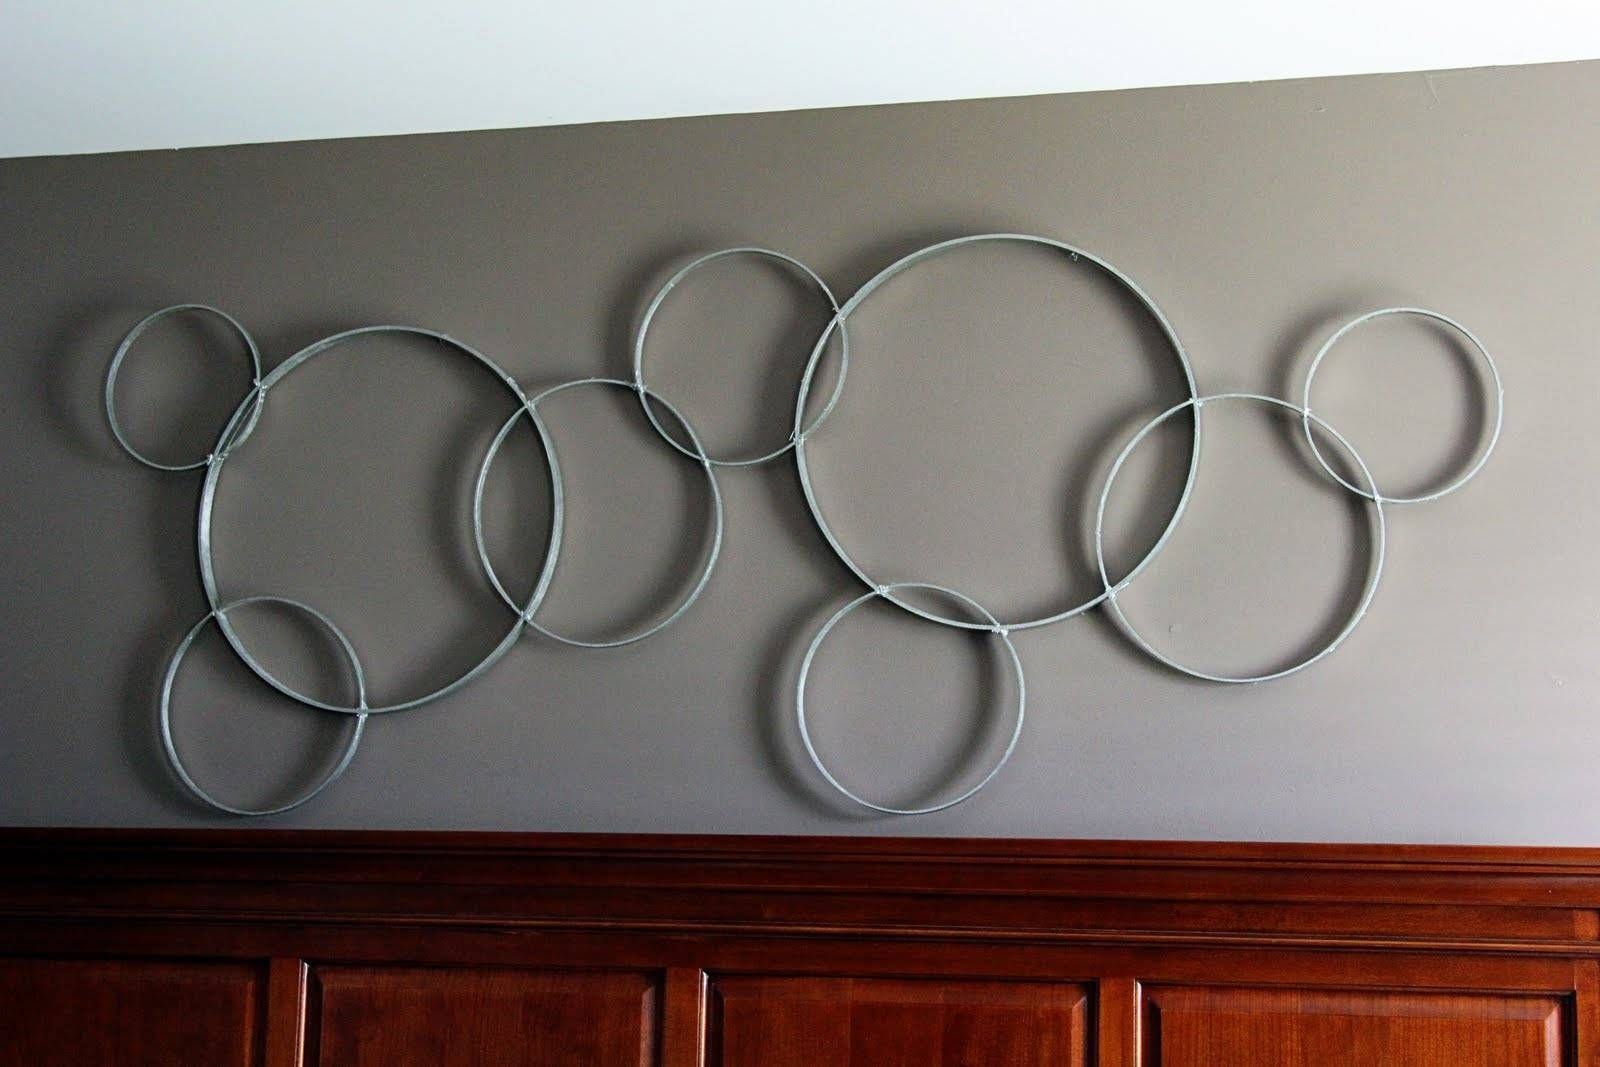 Amusing 30+ Circle Wall Art Design Ideas Of Intricate Circle Metal Inside Most Current Circles 3d Wall Art (Gallery 20 of 20)